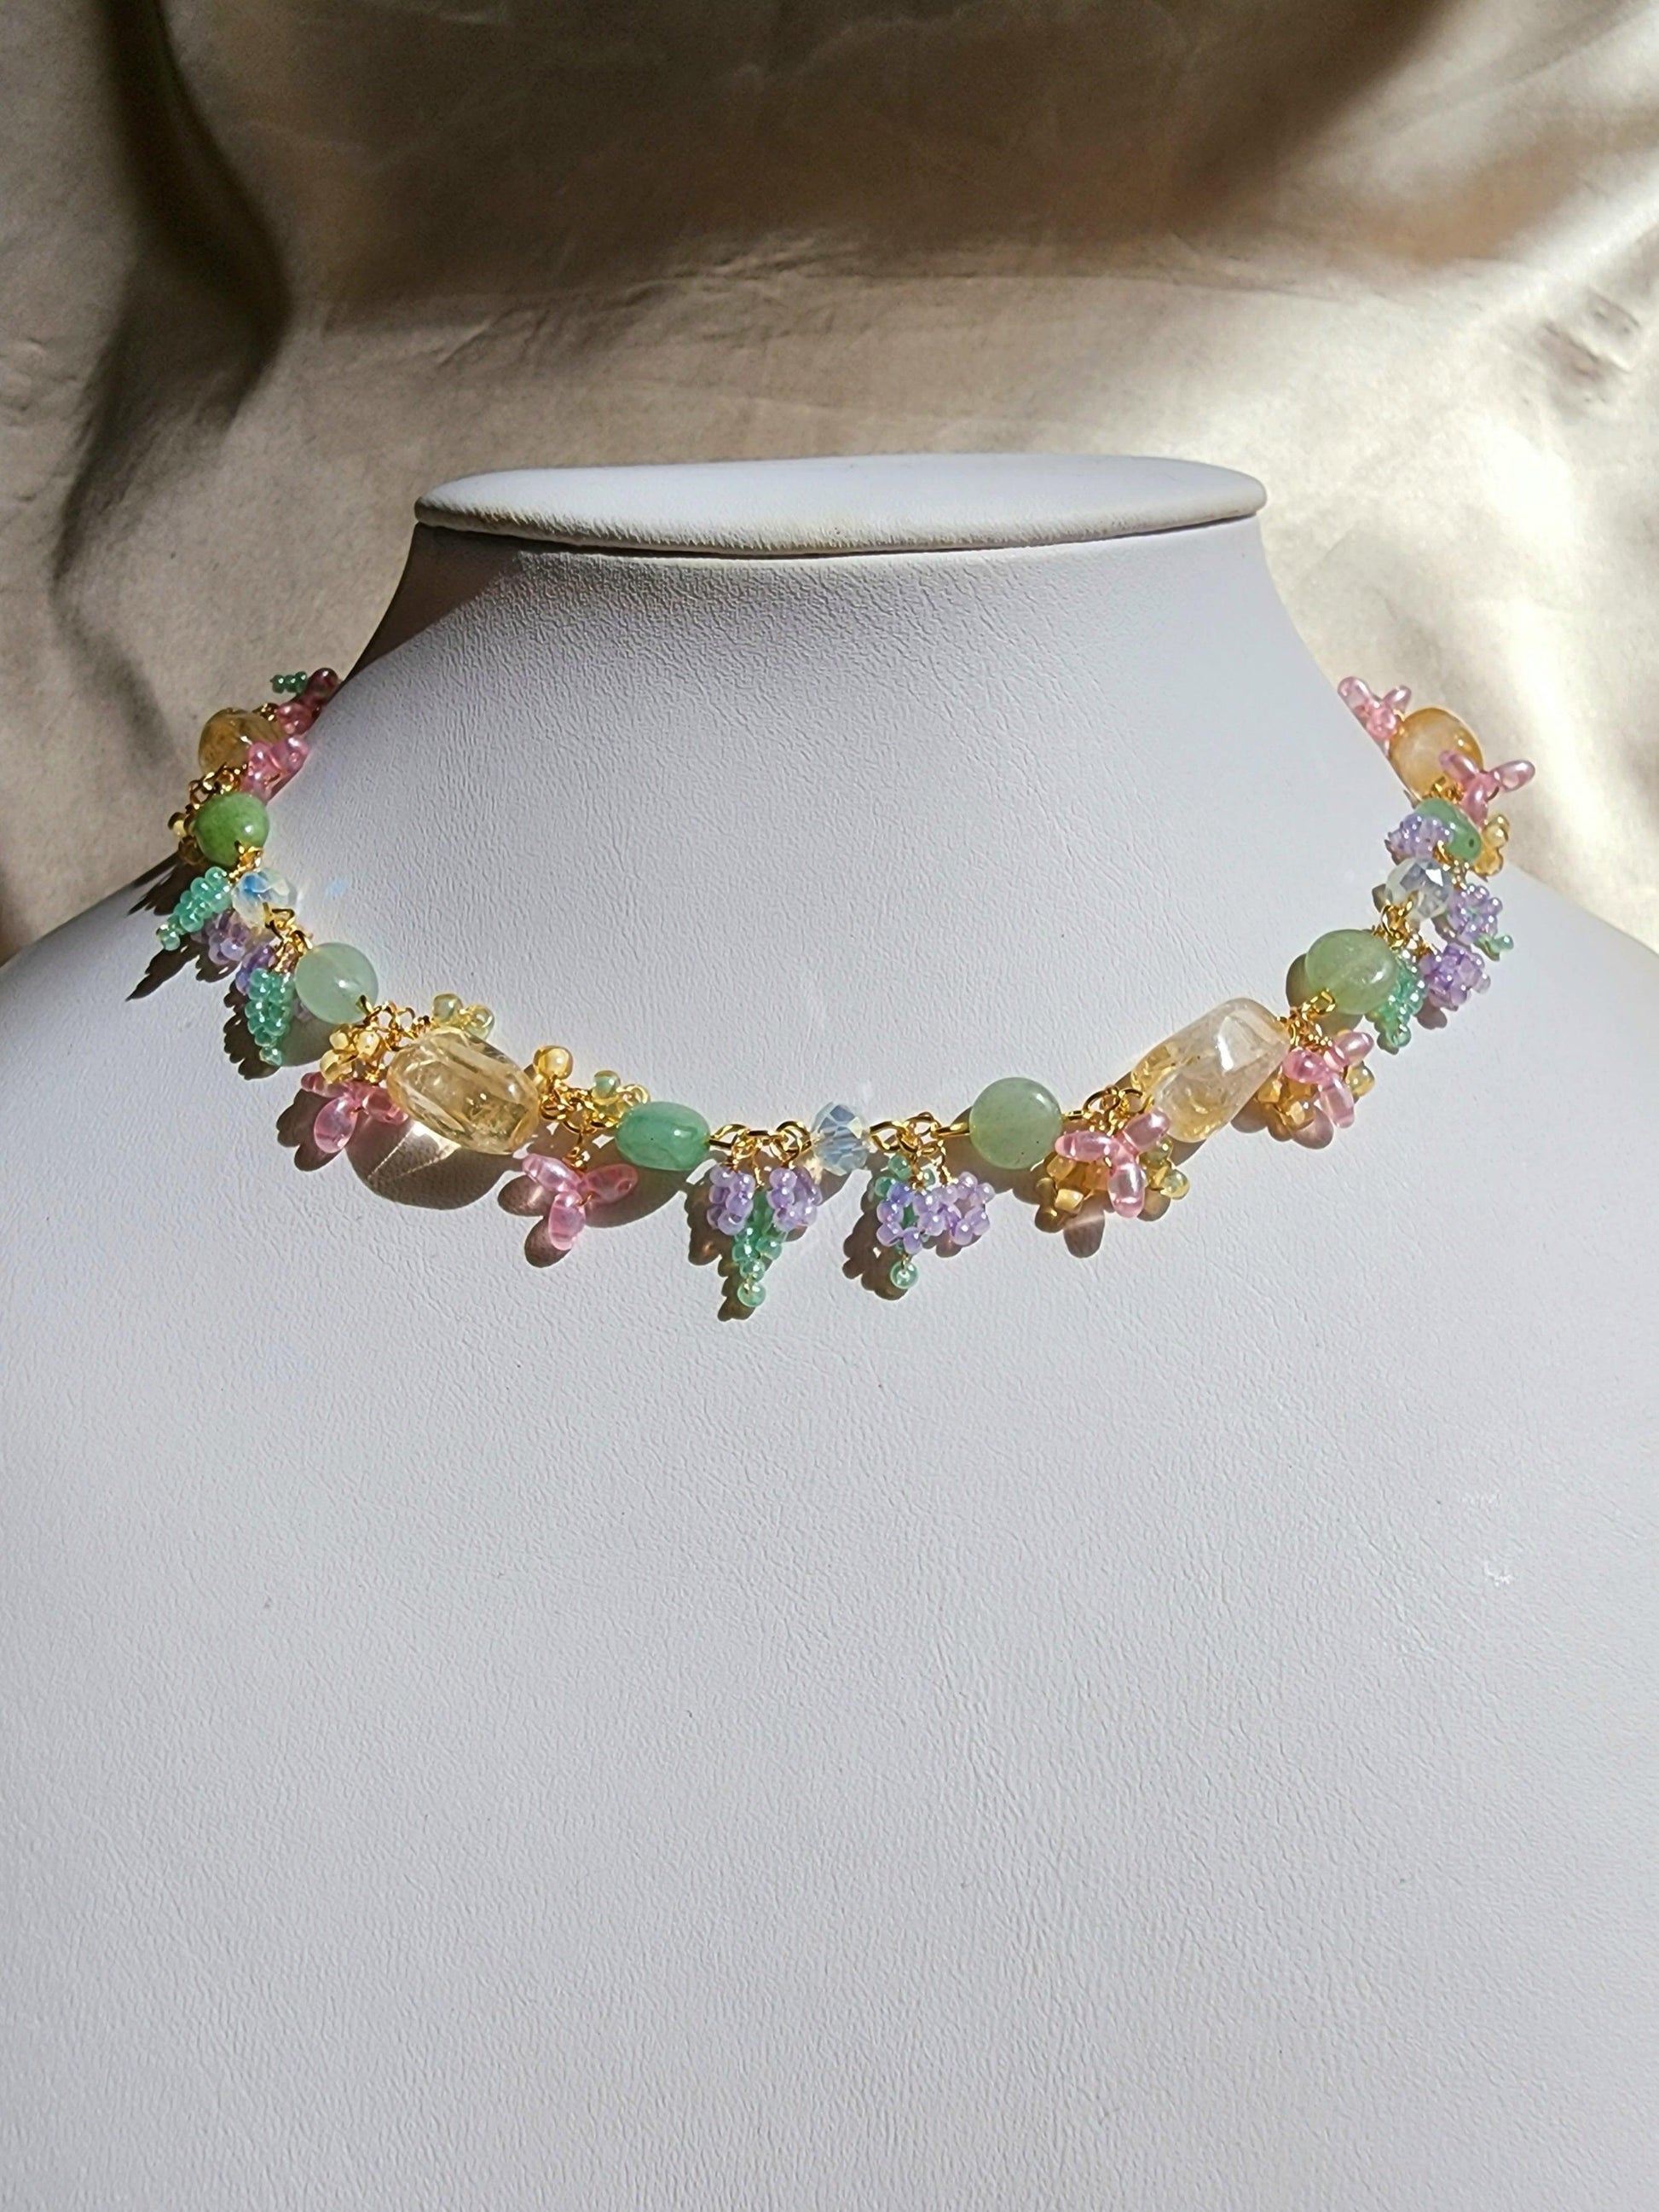 A vibrant pastel necklace with flower and leaf details made of seed beads. Green aventurine and citrine gives the impression of a warm afternoon in the forest with enchanting seed bead flowers and plants in pastel pink, purple, yellow, and green. A dreamy piece fit for forest fairies.